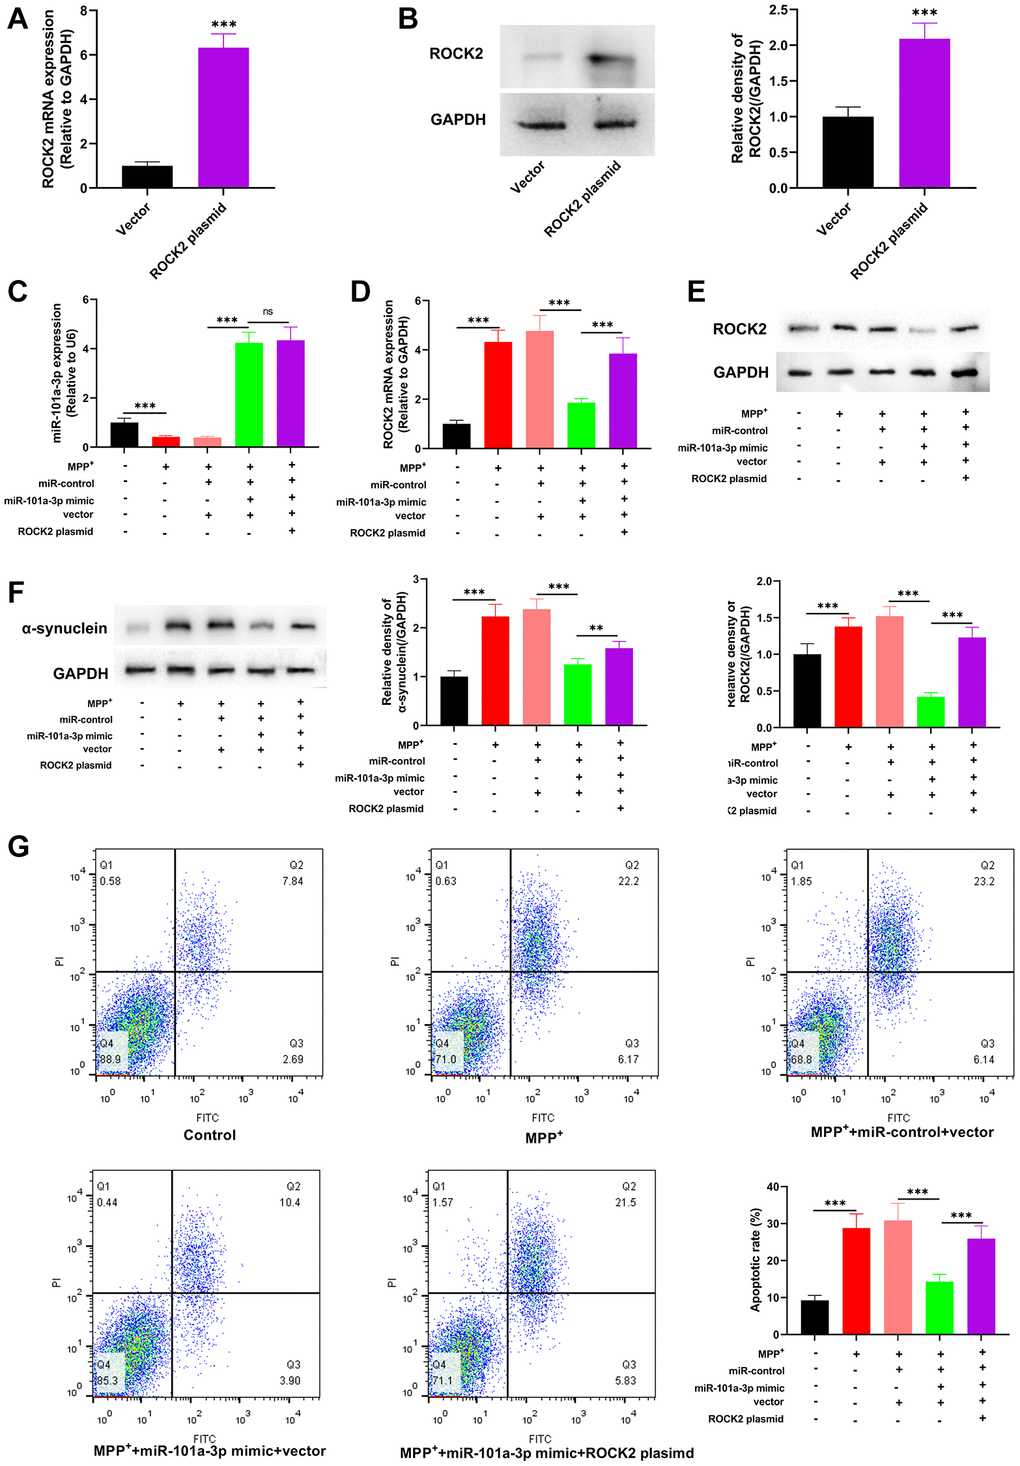 miR-101a-3p reduces the damage of Neuro-2a cells induced by MPP+ via inhibiting ROCK2. To confirm the mechanisms of miR-101a-3p and ROCK2 in MPP+-induced injury of Neuro-2a cells, miR-101a-3p mimics and ROCK2 overexpression plasmids were transfected into Neuro-2a cells before Neuro-2a cells were exposed to MPP+. There were 5 groups: control group, MPTP group, MPP++miR-control+vector group, MPP++miR-101a-3p mimic+vector group, and MPP++miR-101a-3p mimic+ROCK2 plasmid group. (A) qRT-PCR was employed to verify the change in ROCK2 mRNA expression after Neuro-2a cells were transfected with ROCK2 overexpression plasmids. (B) Western blot was employed to examine the change in ROCK2 protein expression after Neuro-2a cells were transfected with ROCK2 overexpression plasmids. (C) Detection of miR-101a-3p expression in each group of cells through qRT-PCR. (D) ROCK2 mRNA expression in each group of cells was detected by qRT-PCR. (E) Western blot detection of ROCK2 protein expression level in each group of cells. (F) Western blotting was conducted to detect α-synuclein protein expression in each group of cells. (G) Flow cytometry was conducted to detect the apoptosis level in each group. **P ***P 